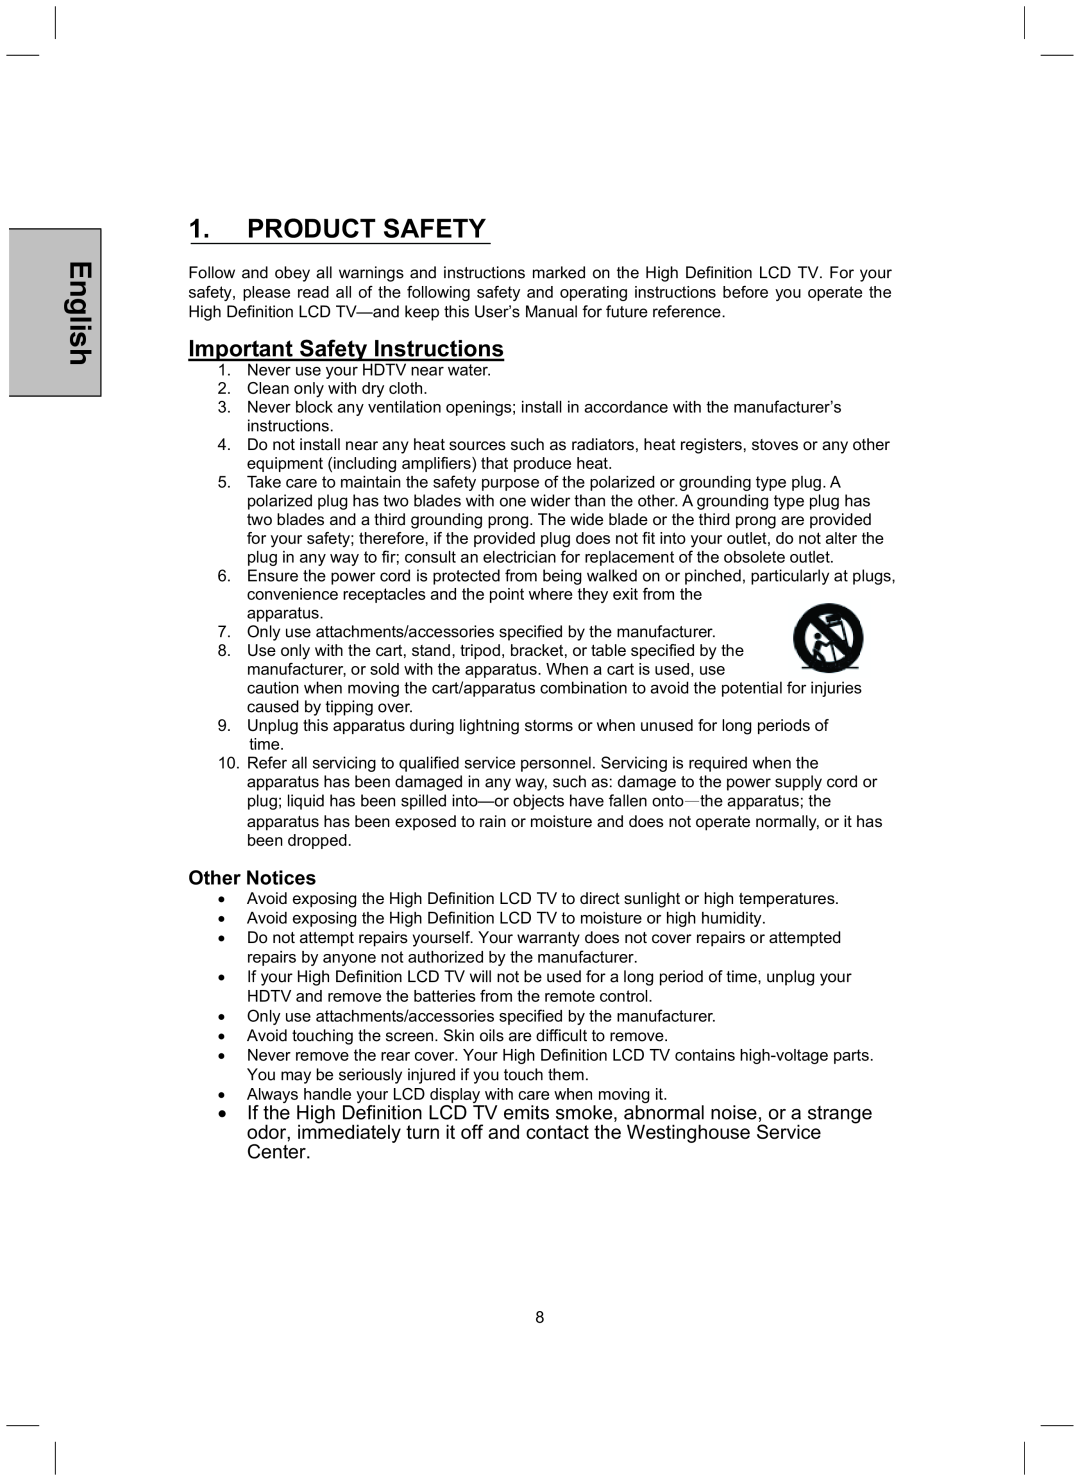 Westinghouse TX-52H480S user manual Important Safety Instructions, Other Notices, English, Product Safety 